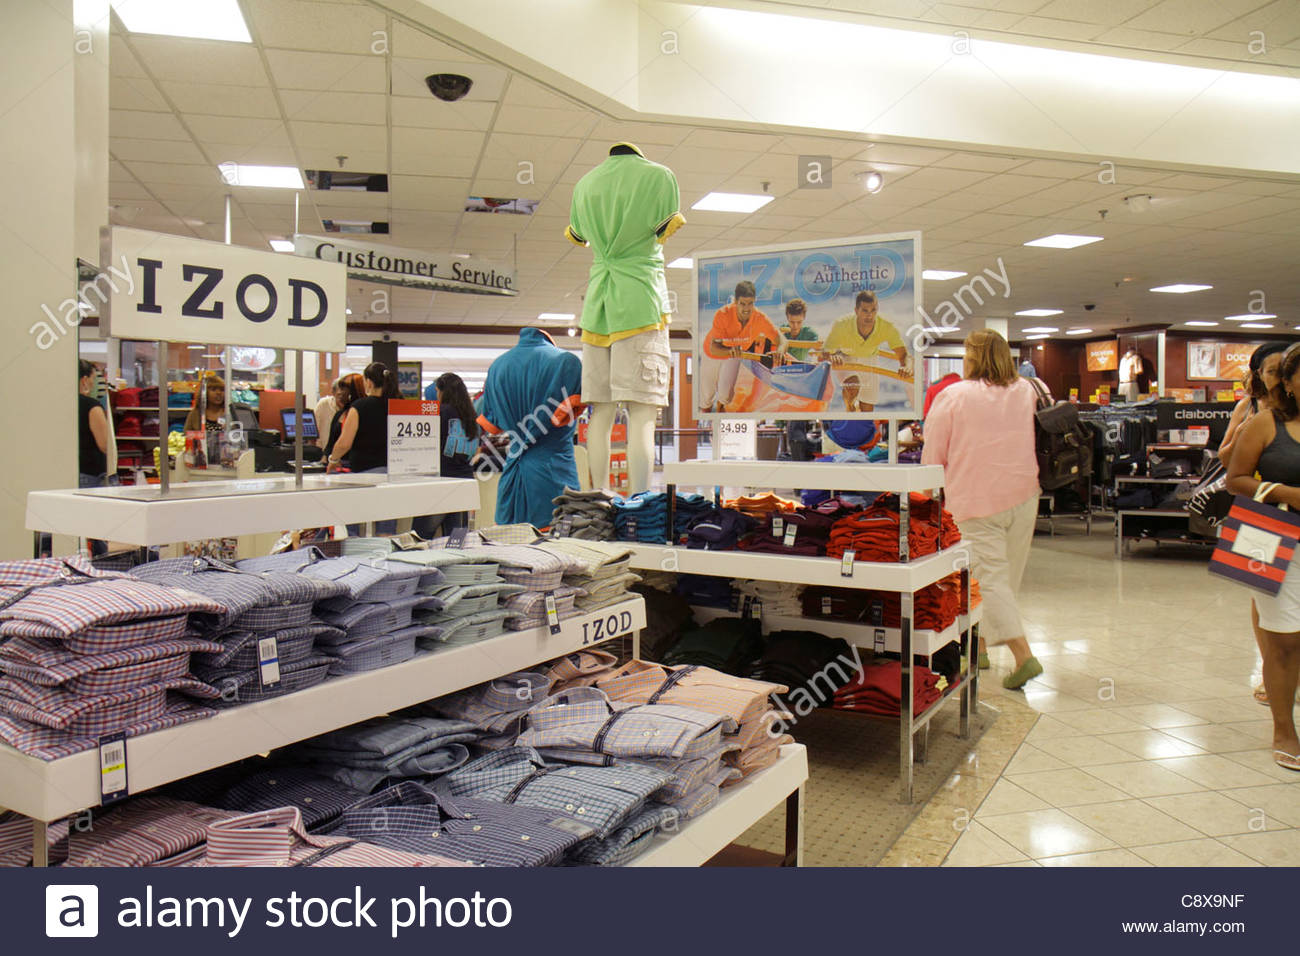 How do you find an IZOD clothing outlet?